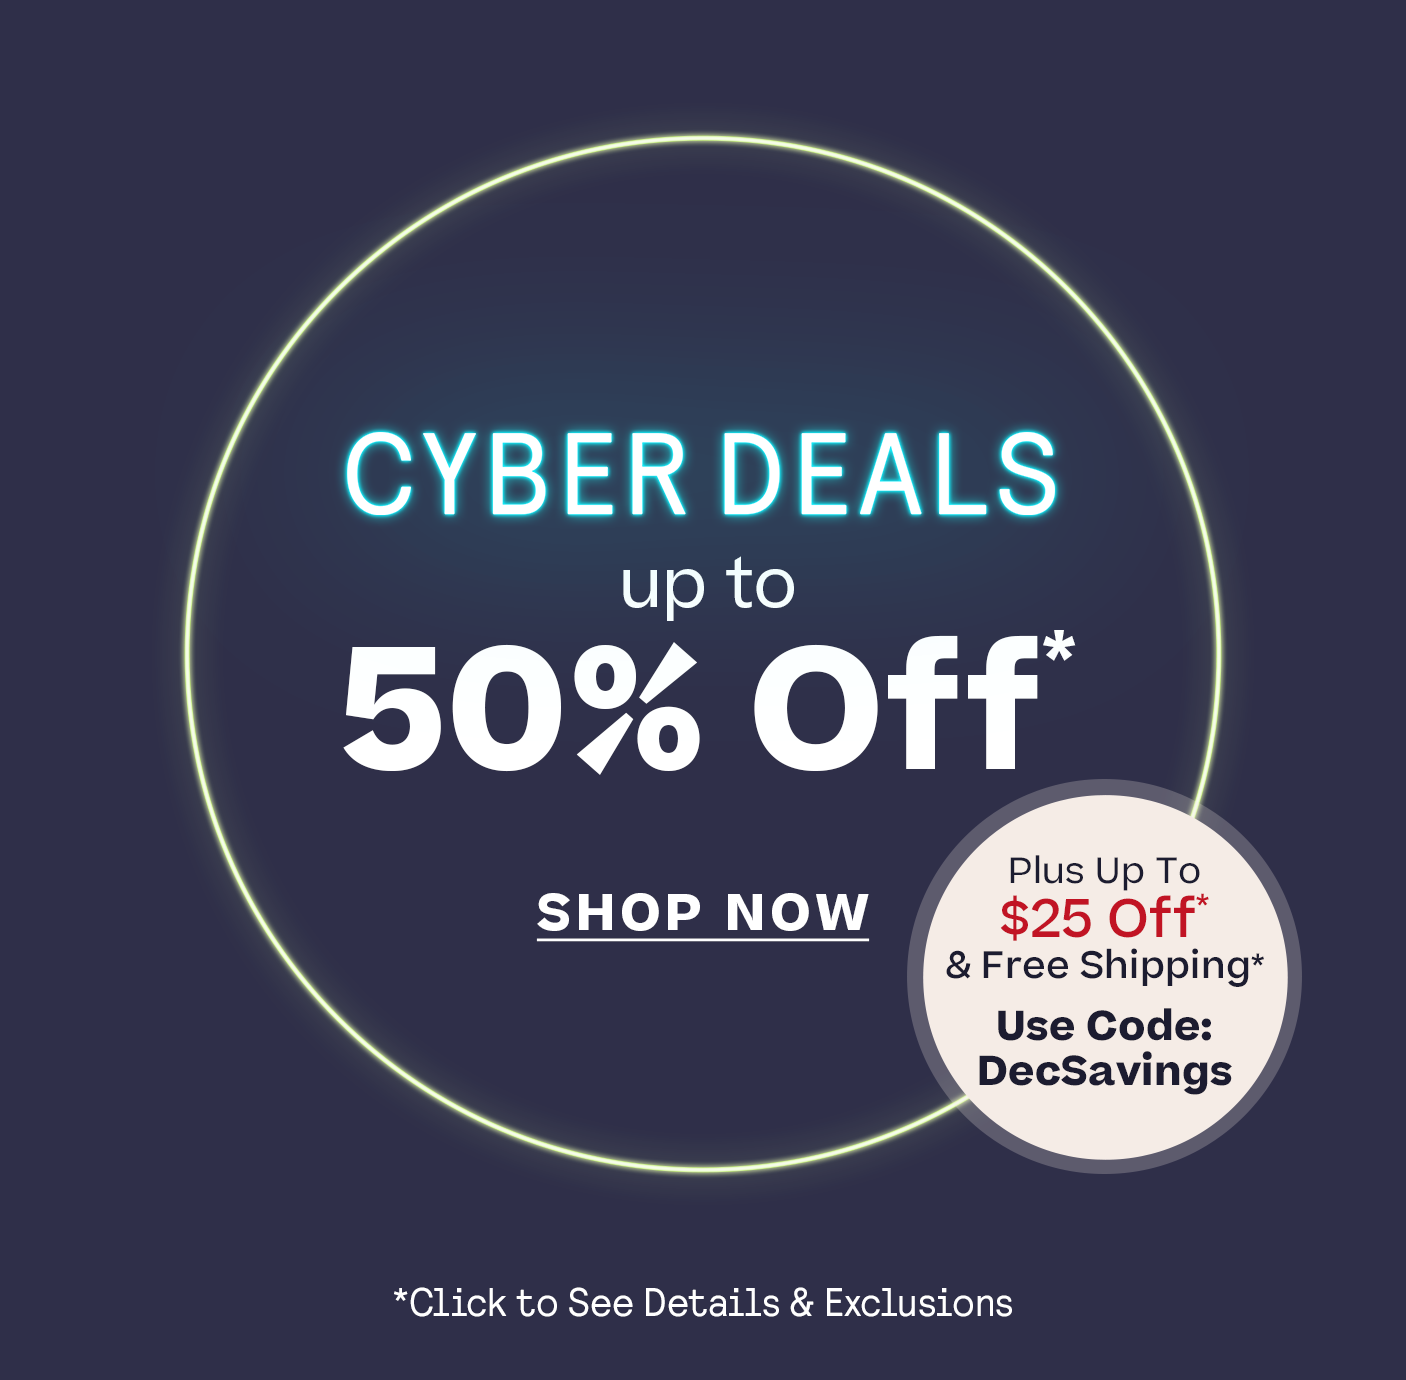 Up to 50% Off* Cyber Deals up to 50% Off* + up to $25 off* Plus, Free Shipping Code DECSAVINGS *Click for details